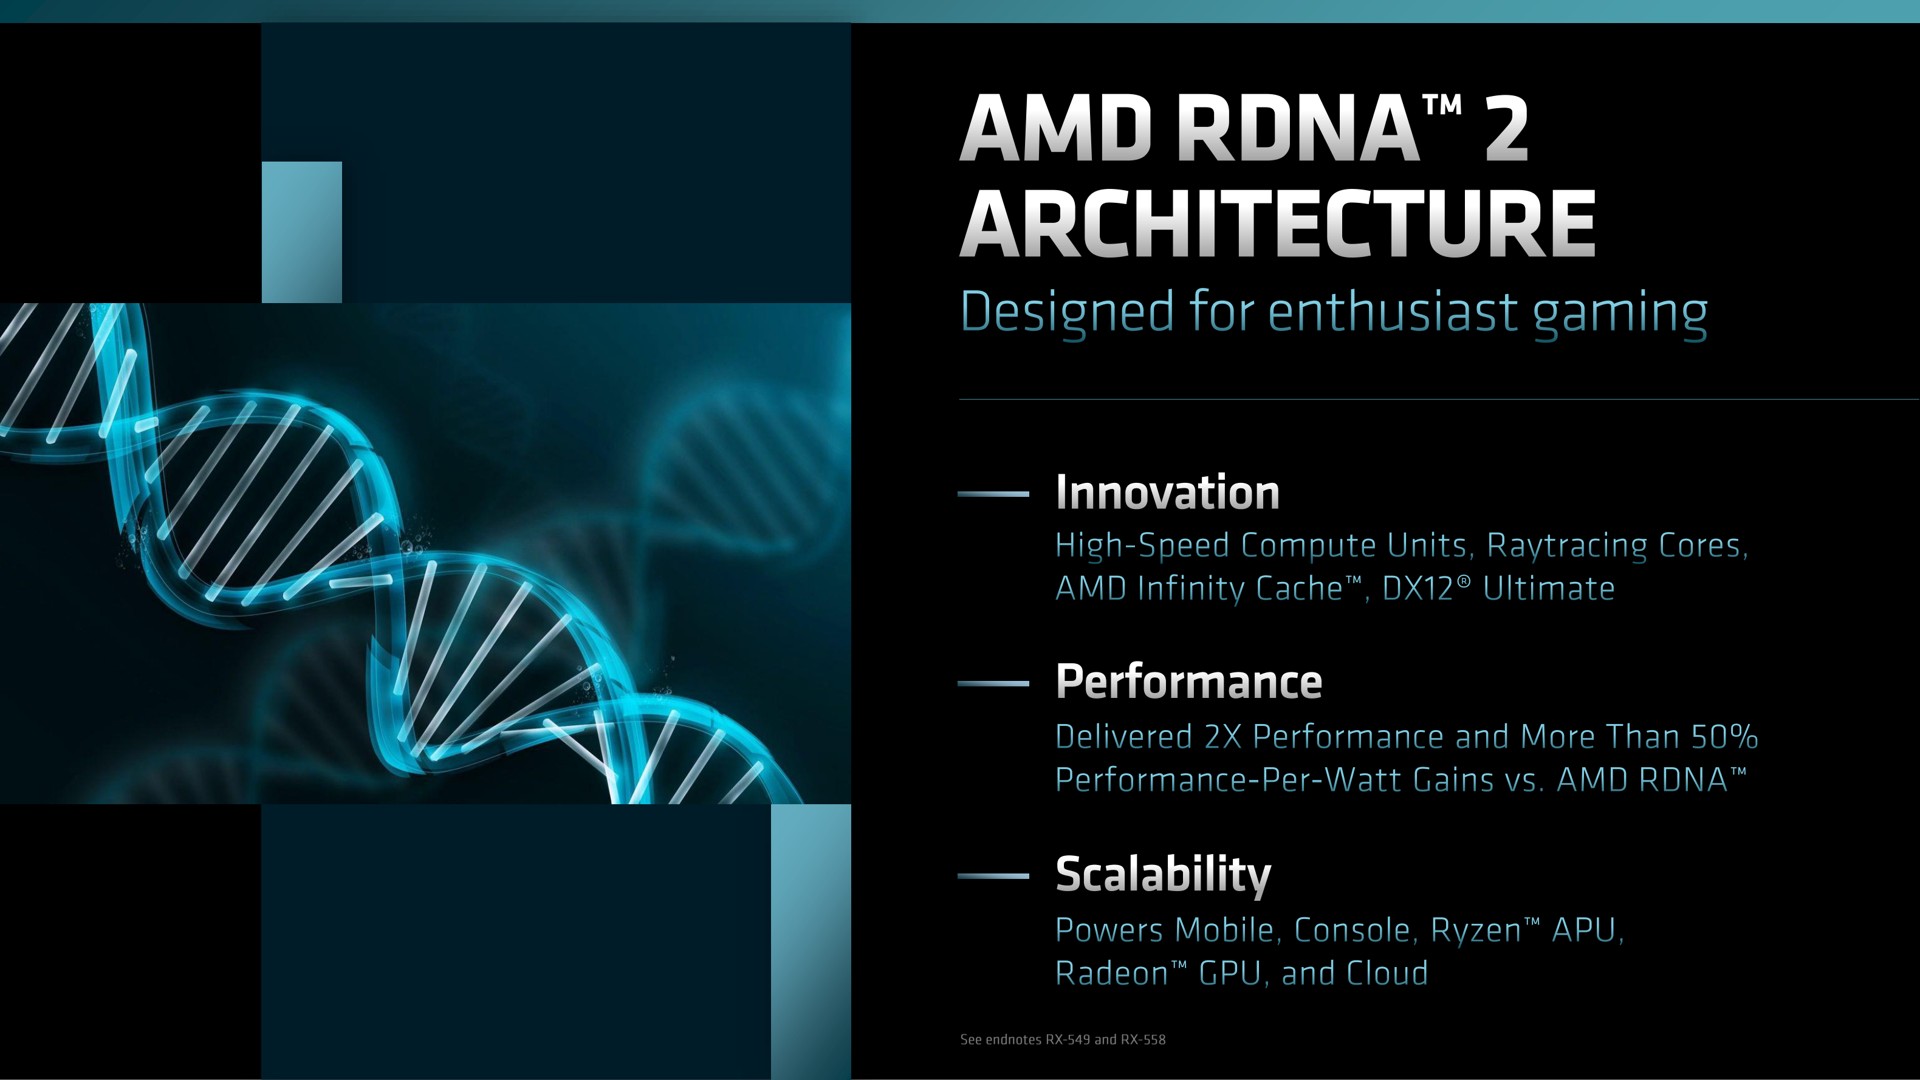 architecture designed for enthusiast gaming | AMD